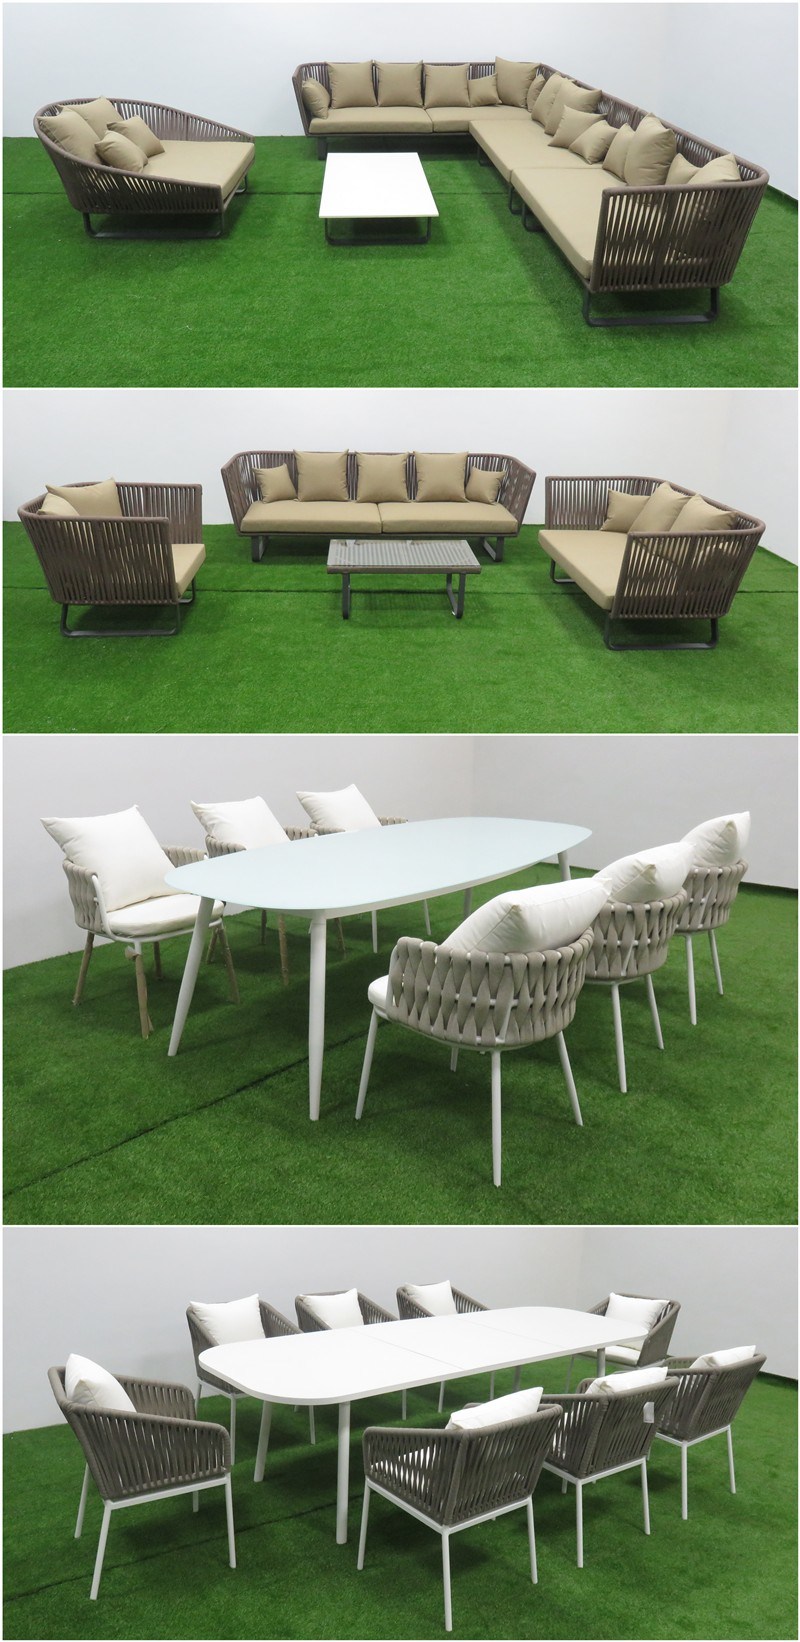 Modern Design Outdoor Rope Fabric and Belt Dining Set for Restaurant Table and Chairs